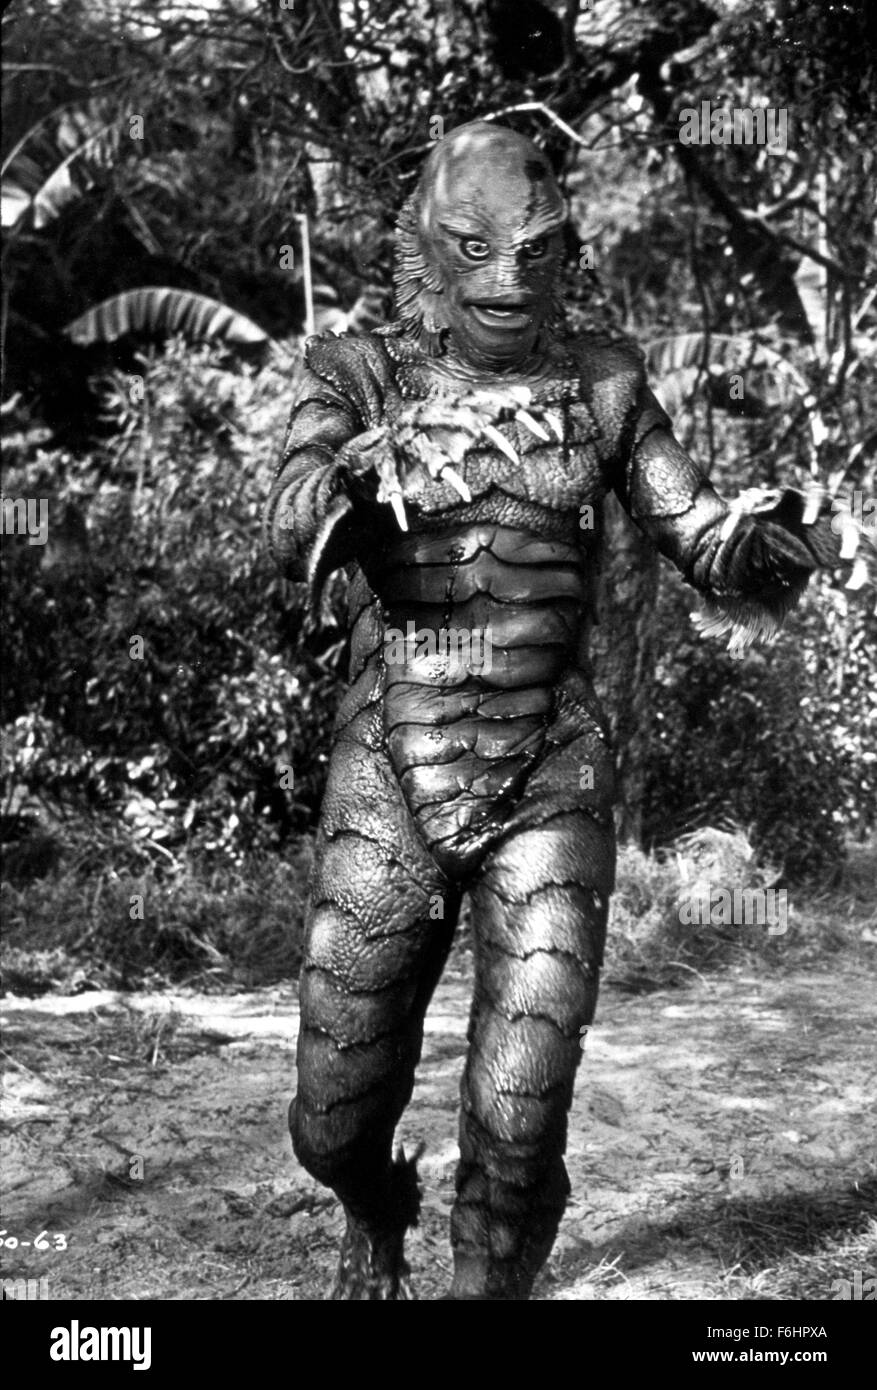 1954, Film Title: CREATURE FROM THE BLACK LAGOON, Director: JACK ARNOLD, Studio: UNIVERSAL, Pictured: RICOU BROWNING, ITS & ALIENS! THINGS, JUNGLE, TREES, SHRUBBERY, RUNNING, ATTACKING, THREATENING, HORROR. (Credit Image: SNAP) Stock Photo